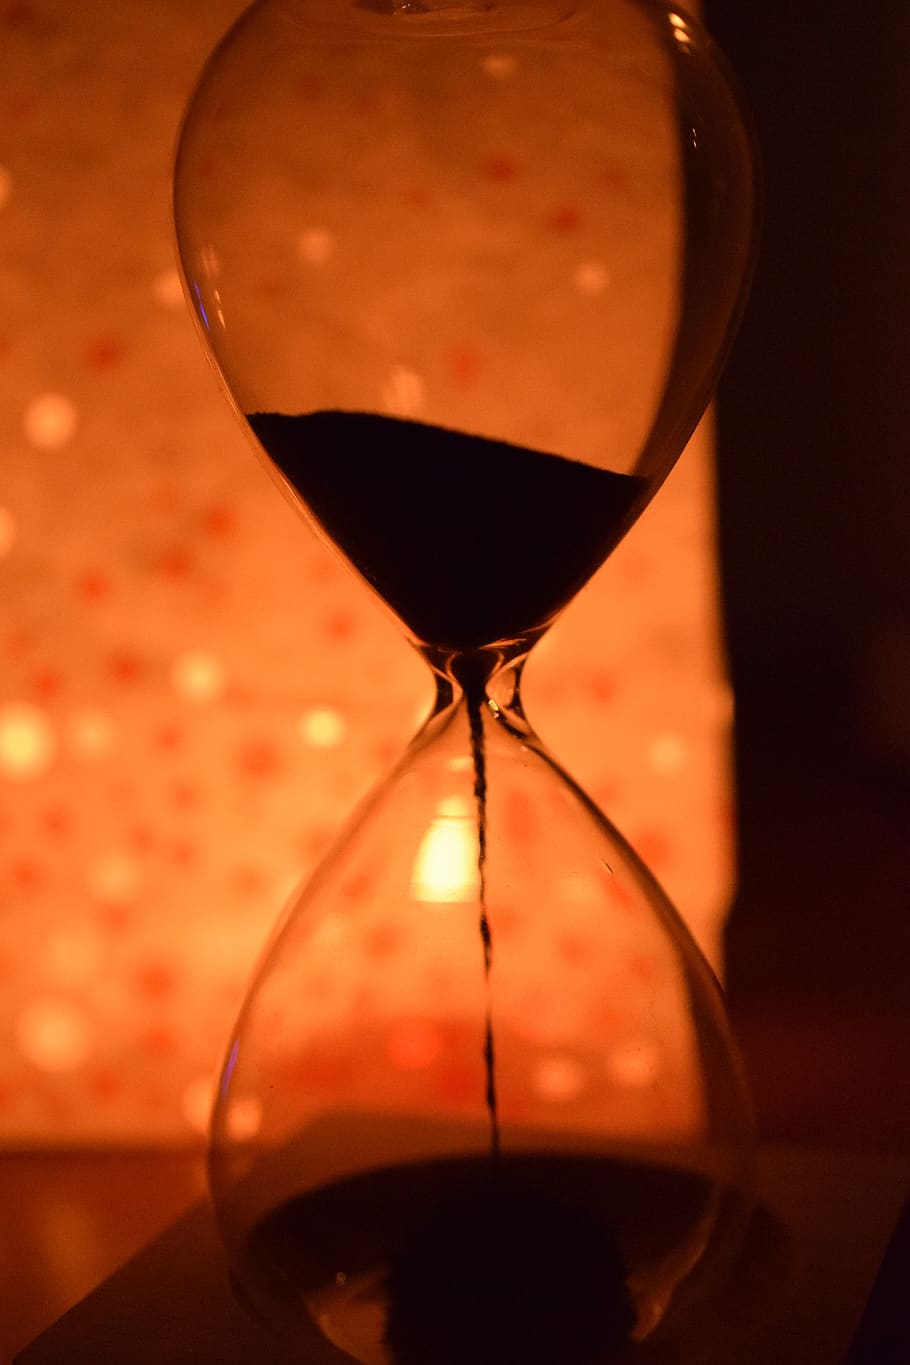 time, hourglass, is running out, transient, hour, night, light, wineglass, glass - material, close-up